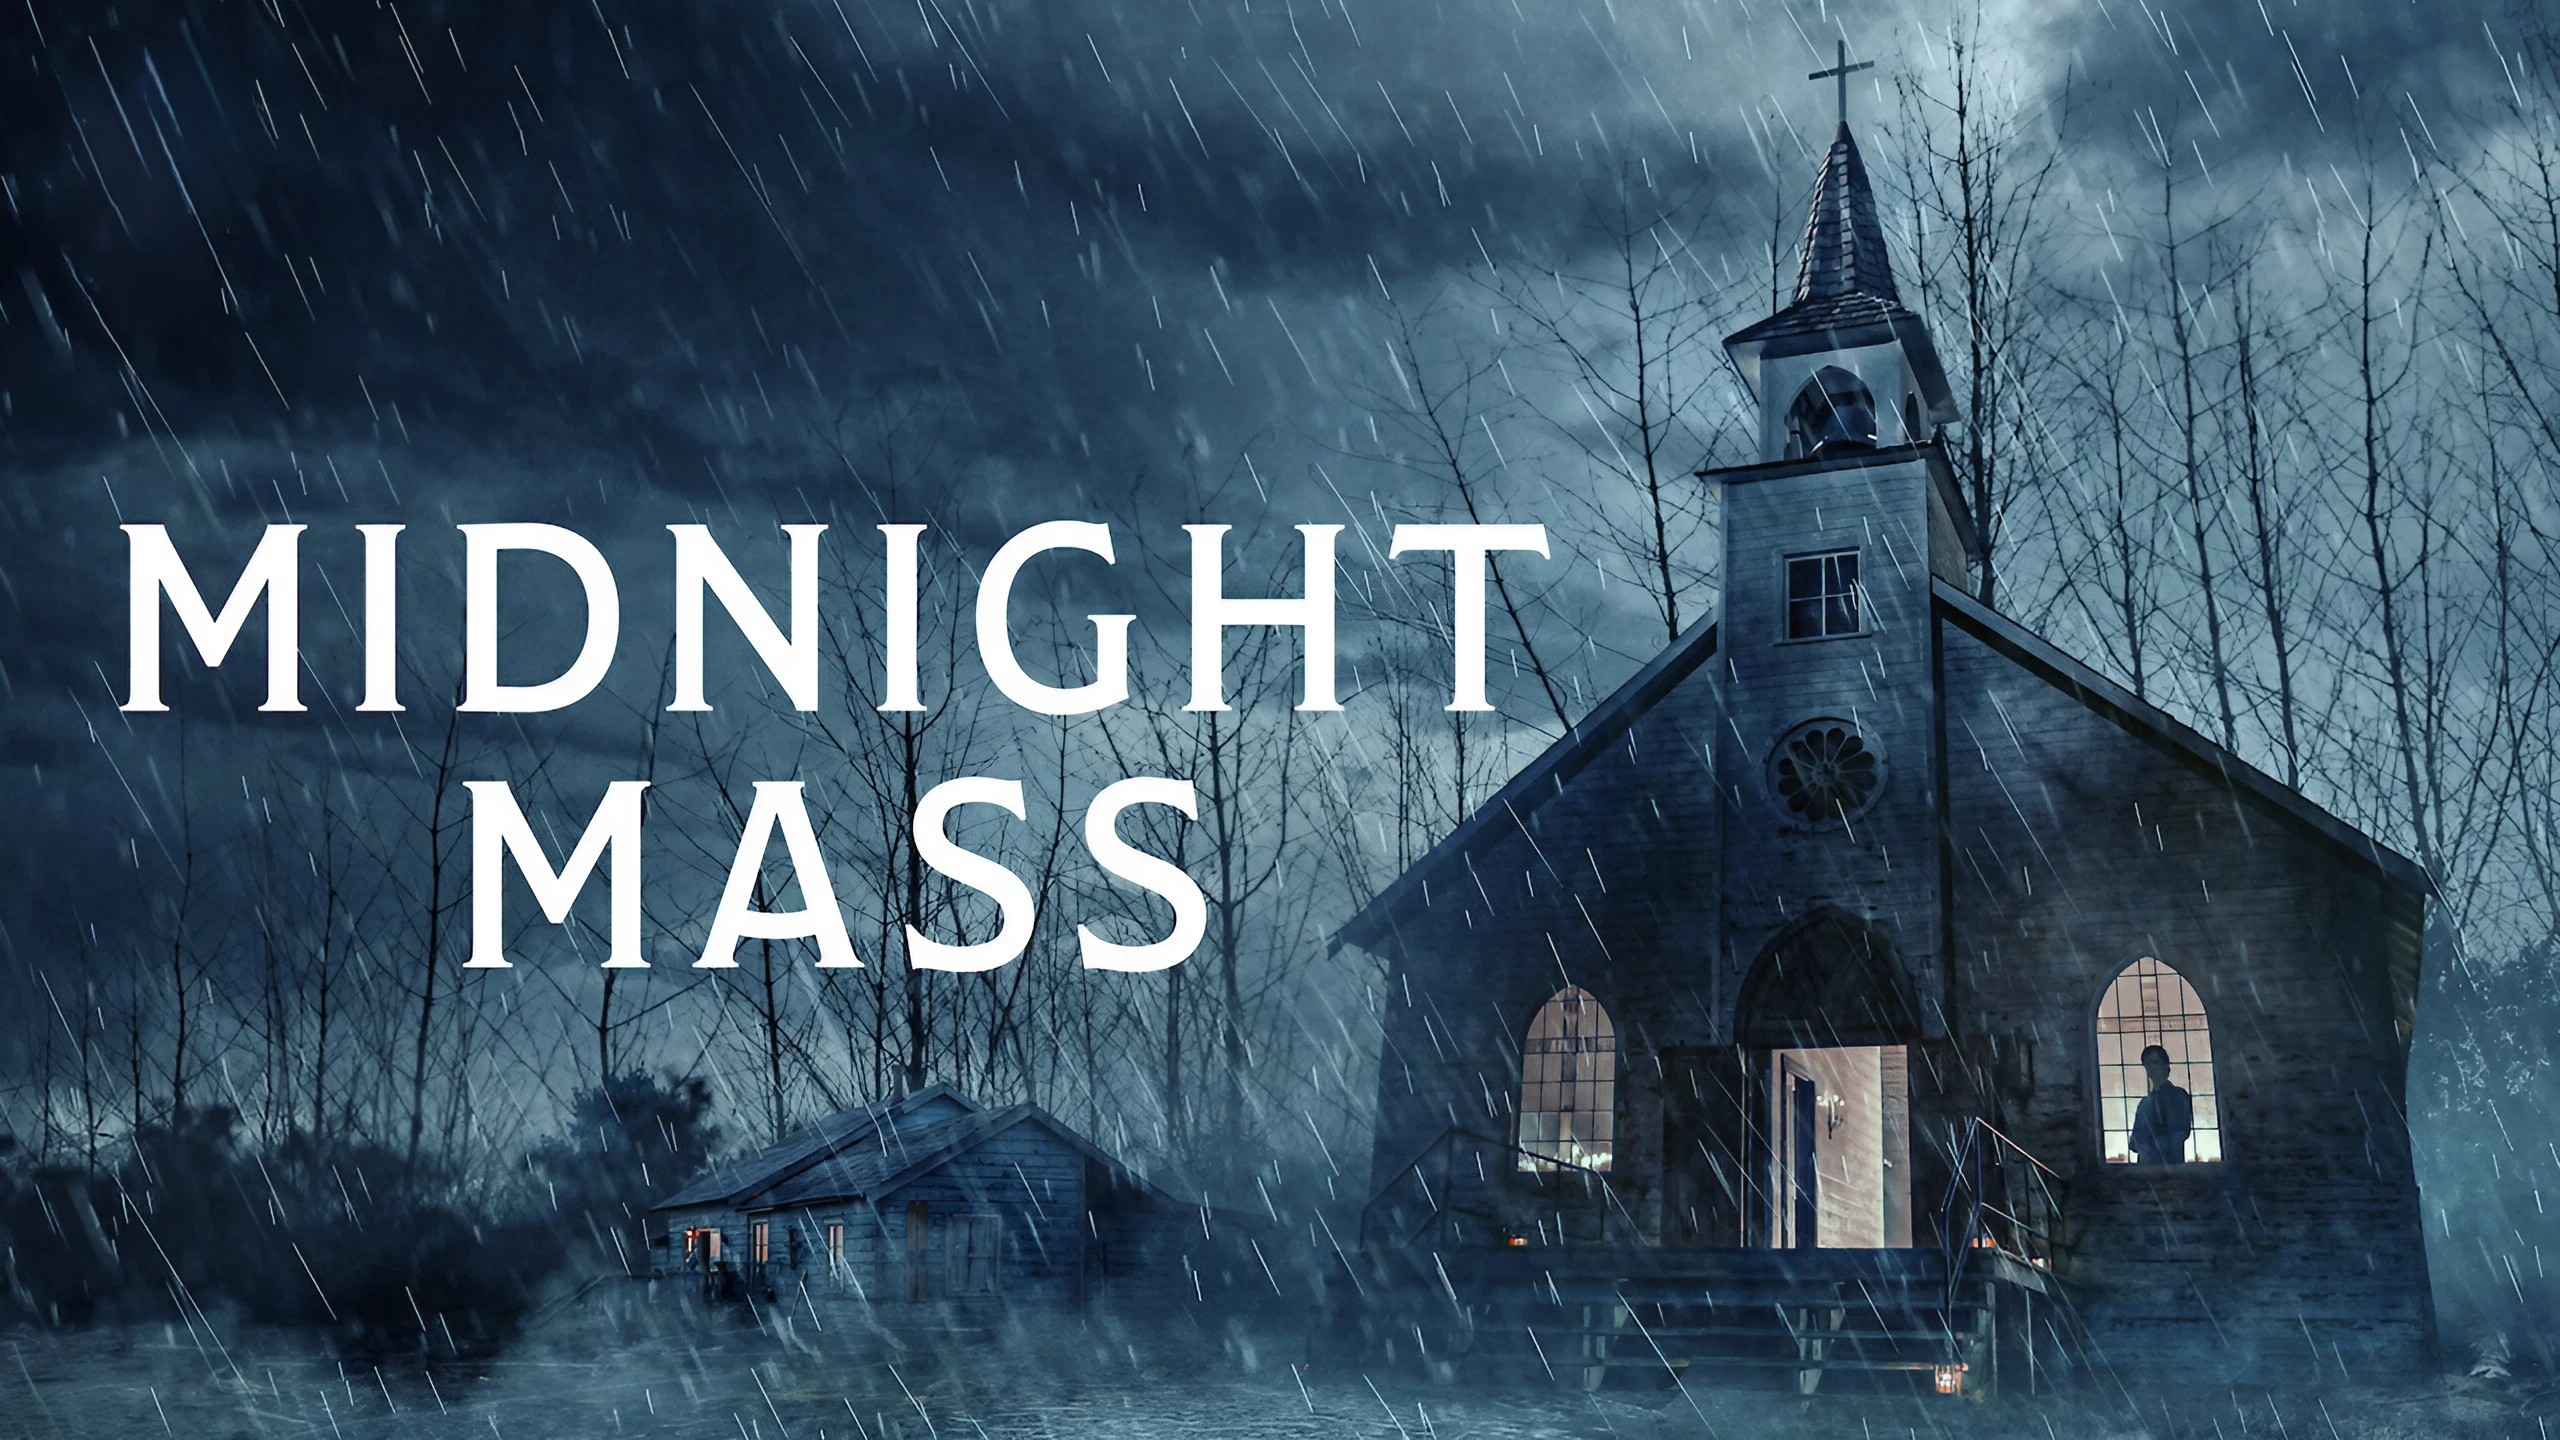 is Midnight Mass based on a true story